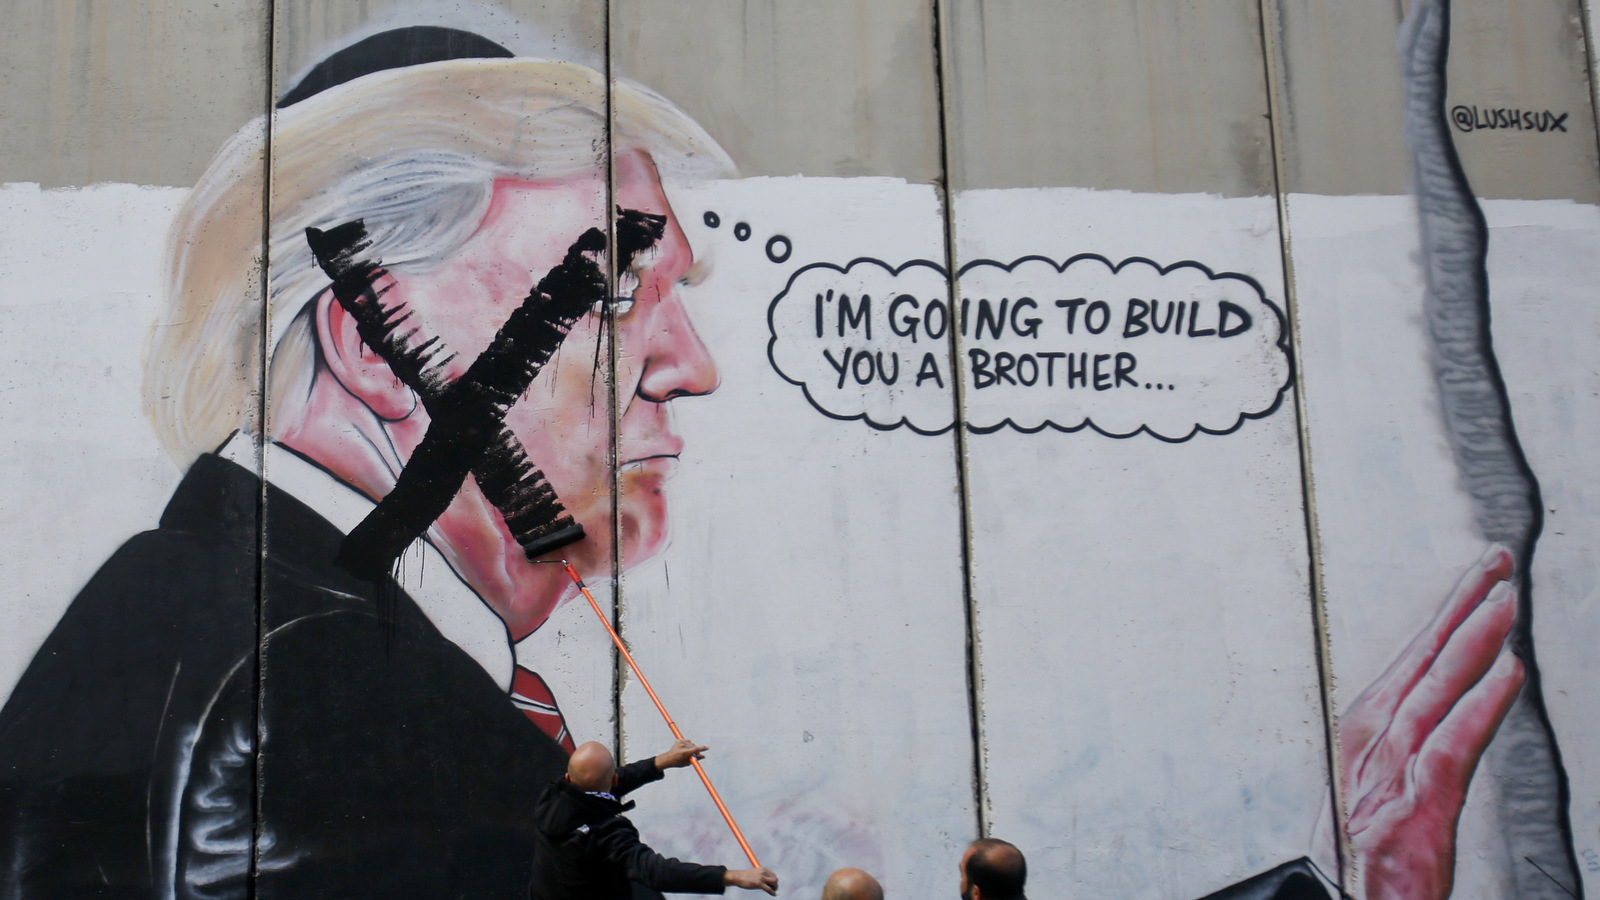 A Palestinian man paints over a mural of the U.S. President Donald Trump during a protest in Bethlehem in the Israeli occupied West Bank, Dec. 7, 2017. Defying dire, worldwide warnings, Donald Trump on Wednesday broke with decades of U.S. and international policy by recognizing Jerusalem as Israel's capital. (AP/Nasser Shiyoukhi)